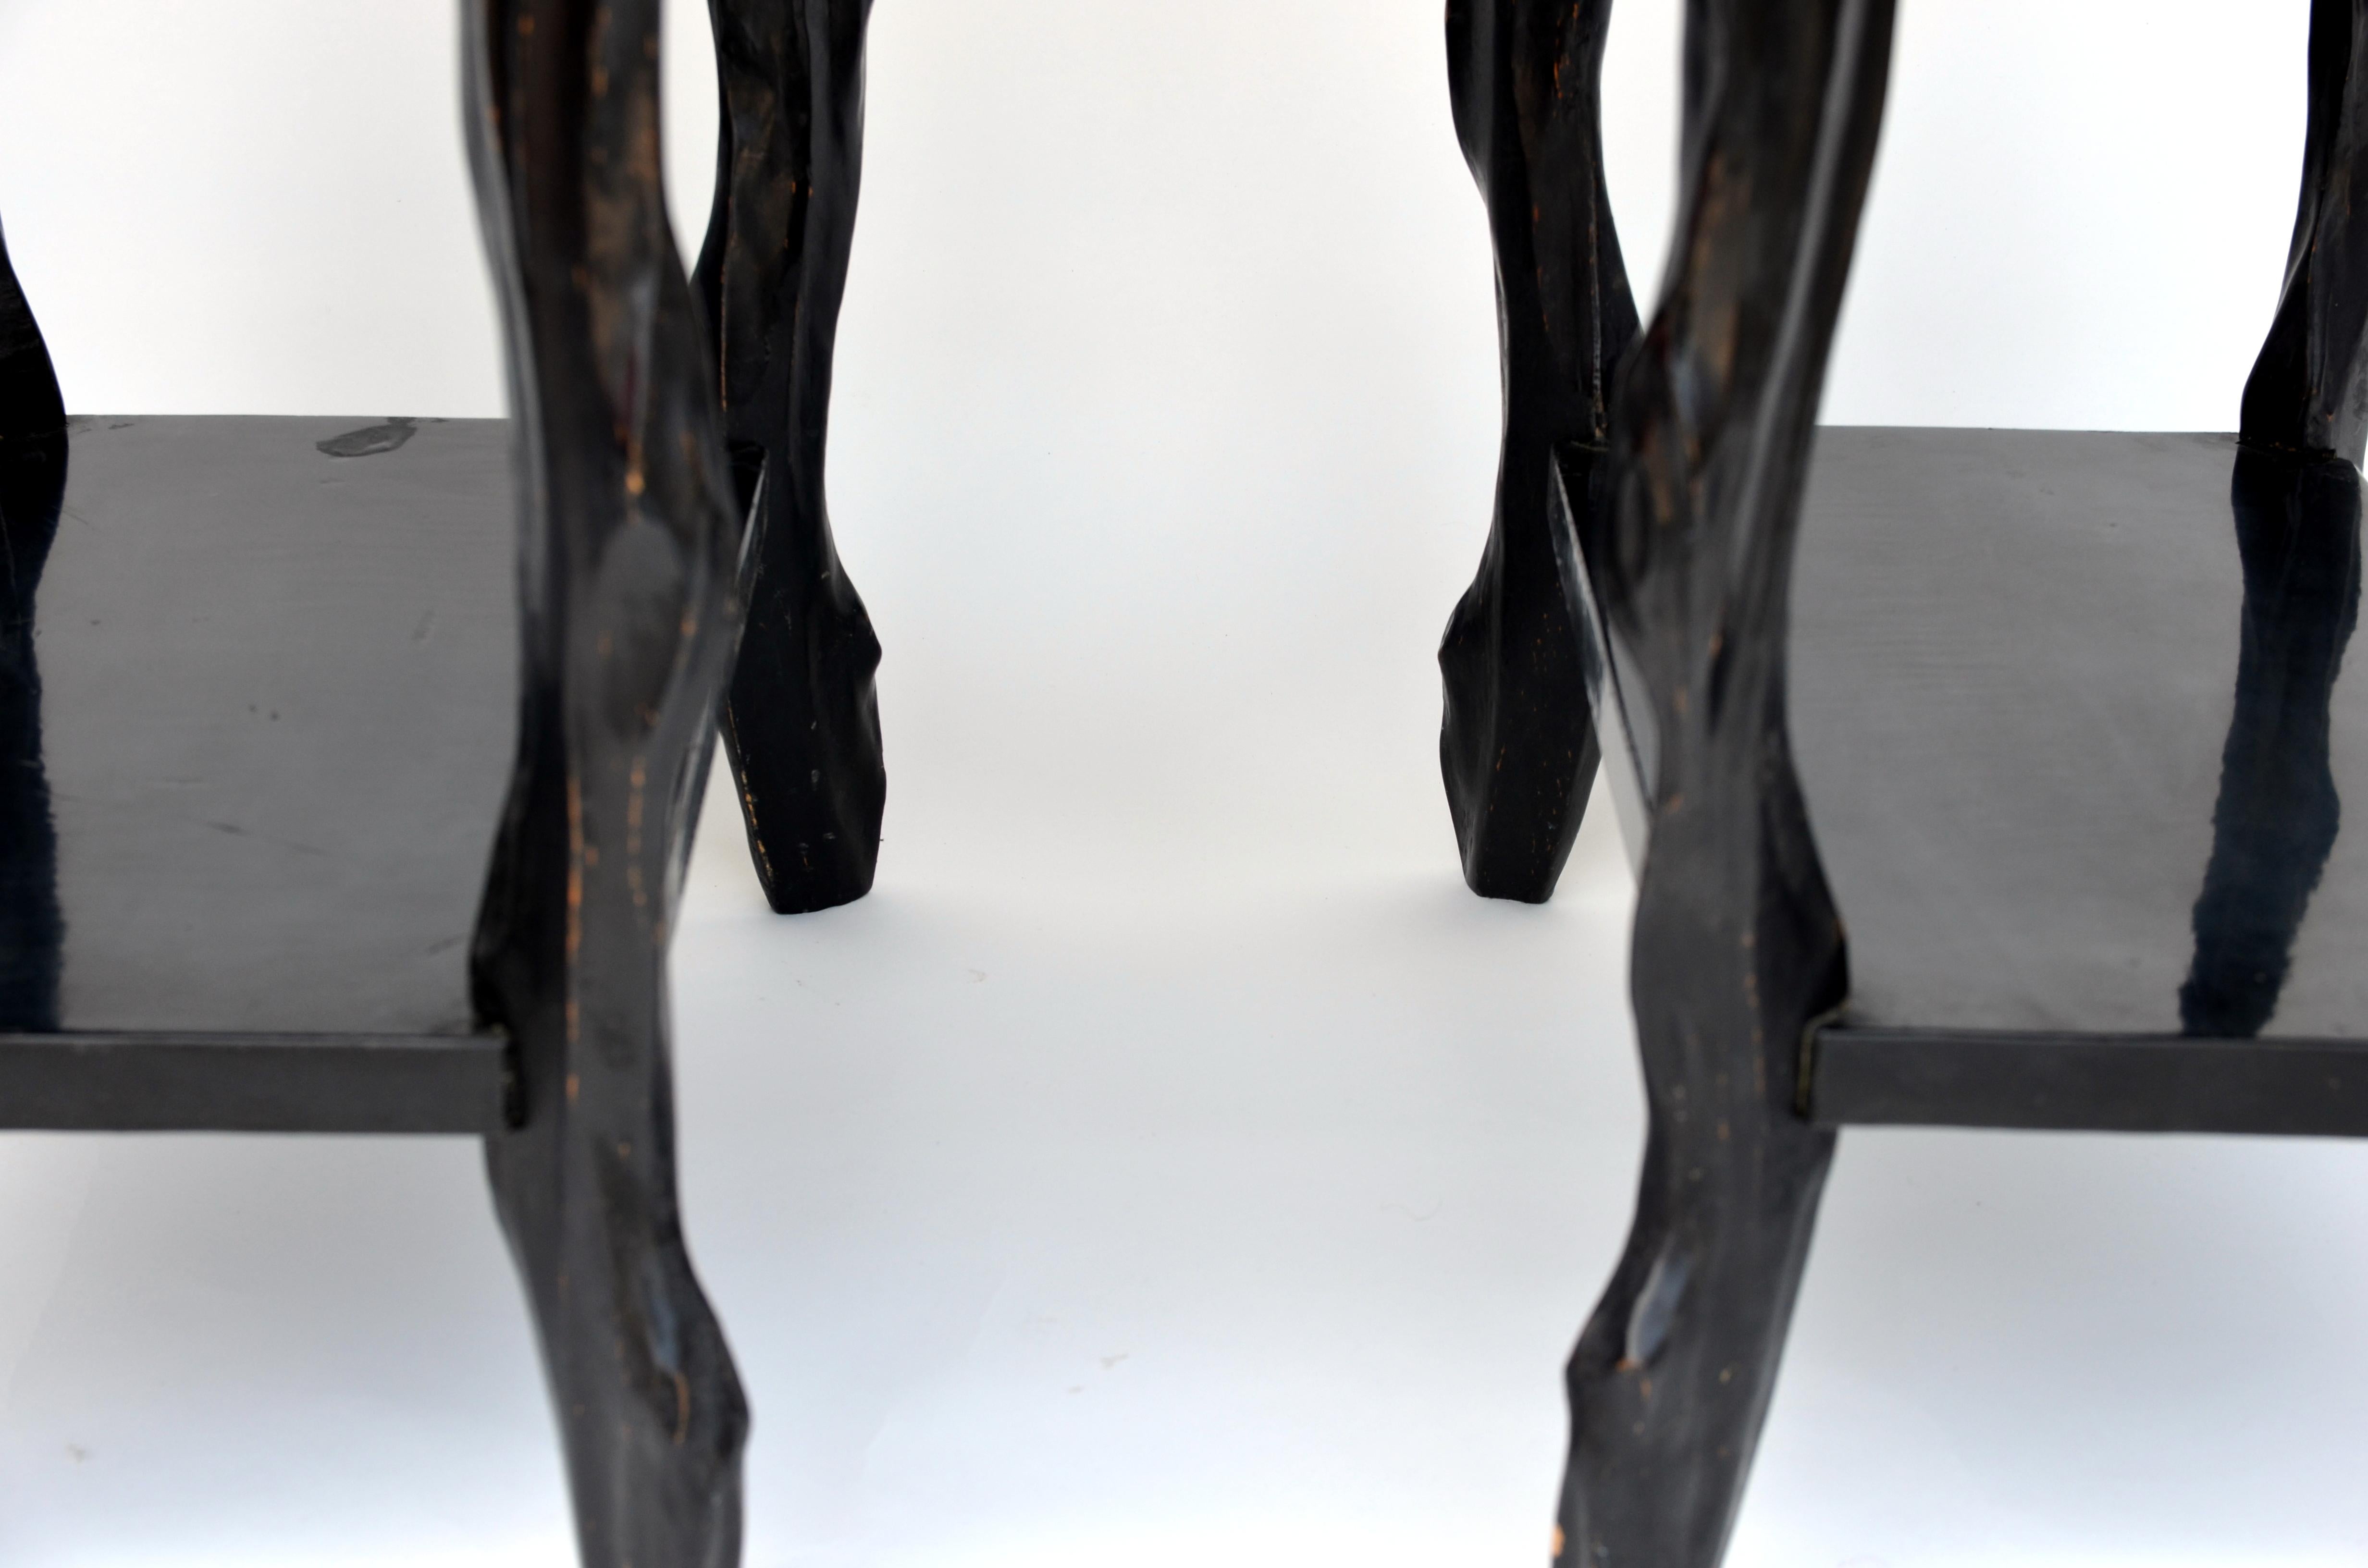 Inlay Pair of Black Lacquer Ebonized and Inlaid Wood Organic End Tables For Sale